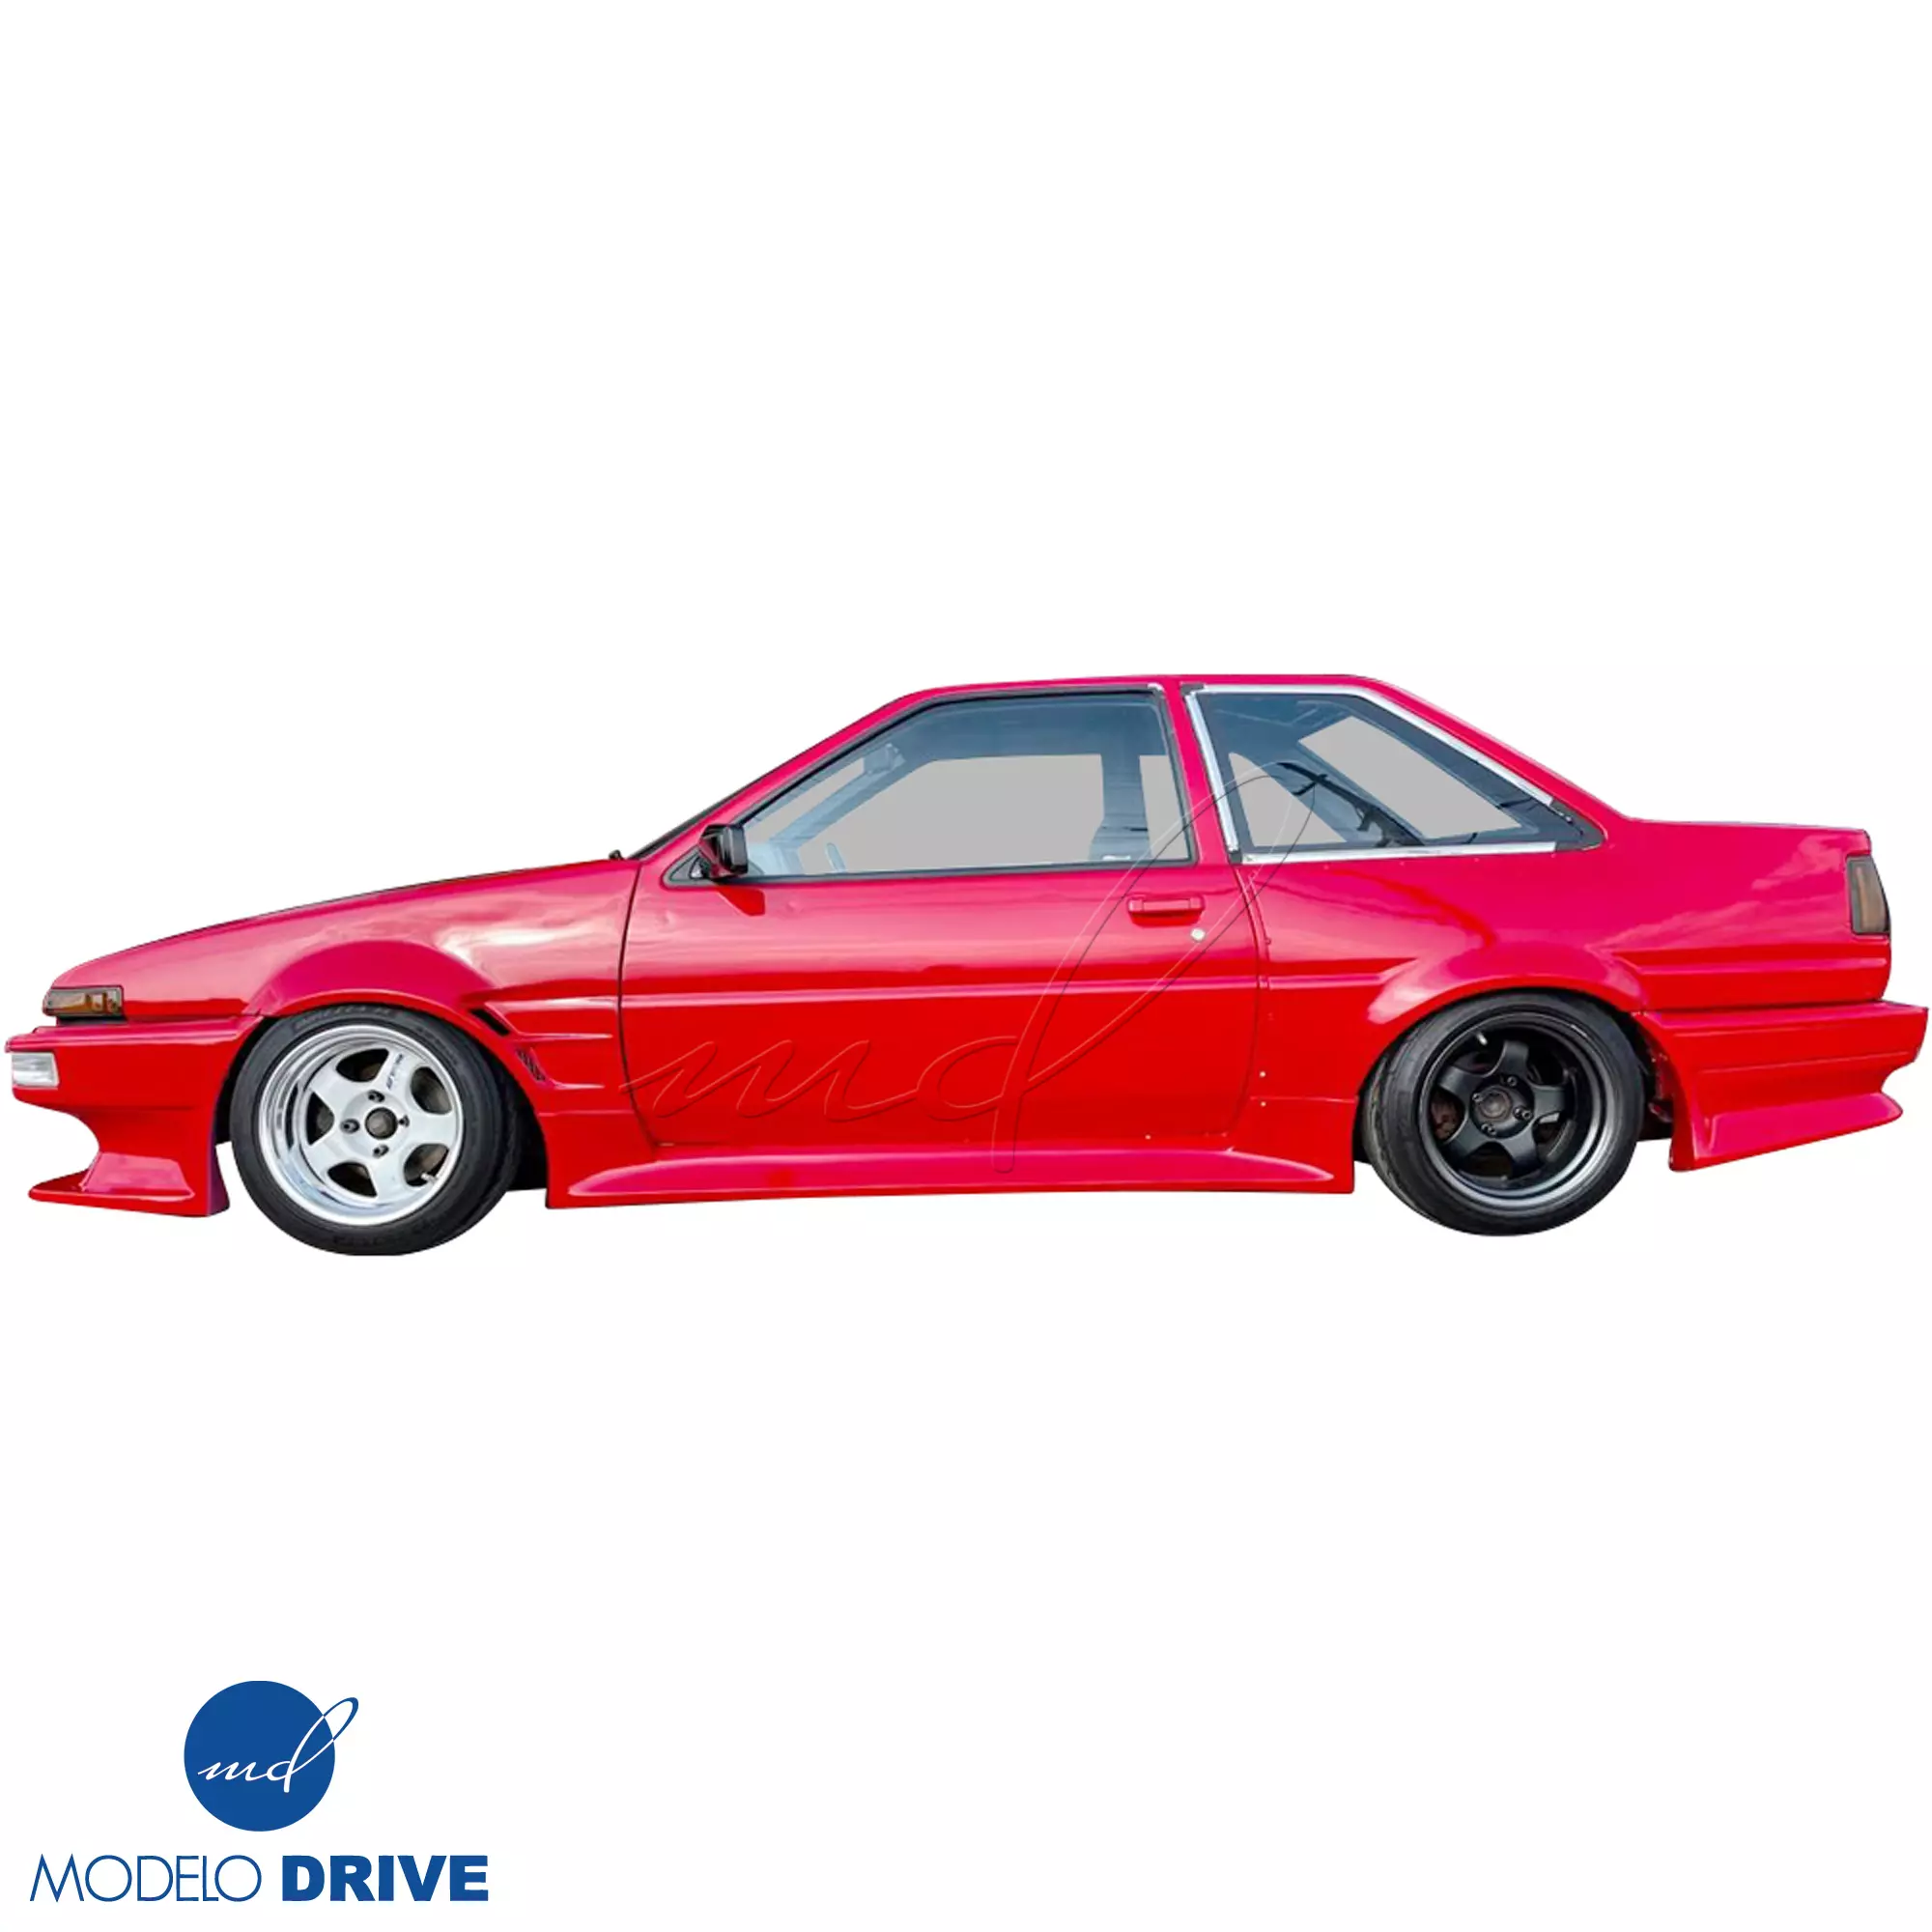 ModeloDrive FRP DMA D1 Wide Body 30mm Fenders Set > Toyota Corolla AE86 1984-1987 > 2dr Coupe - Image 52